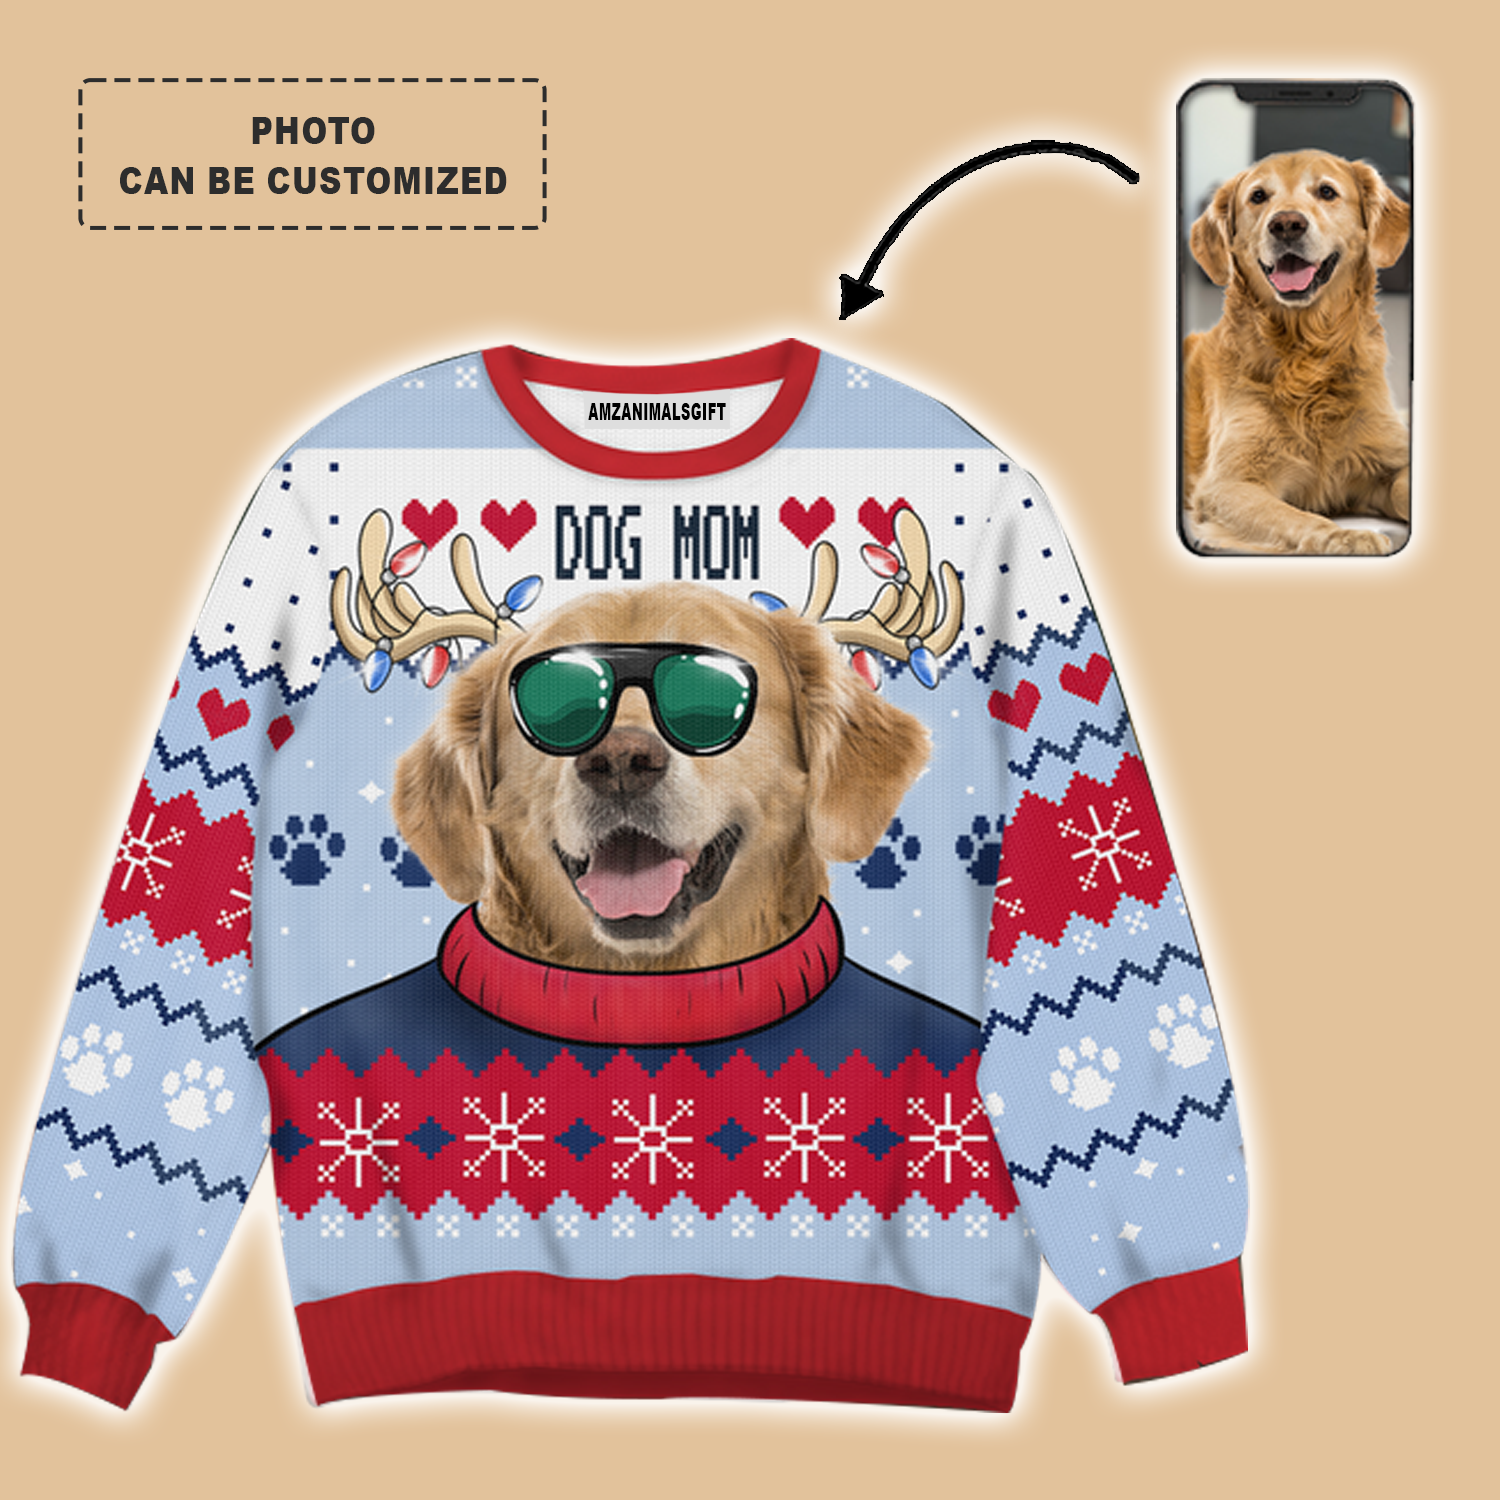 Dog Mom Ugly Christmas Sweater With Customized Photo, Sweater Outfit For Women On Christmas, New Year, Autumn, Winter